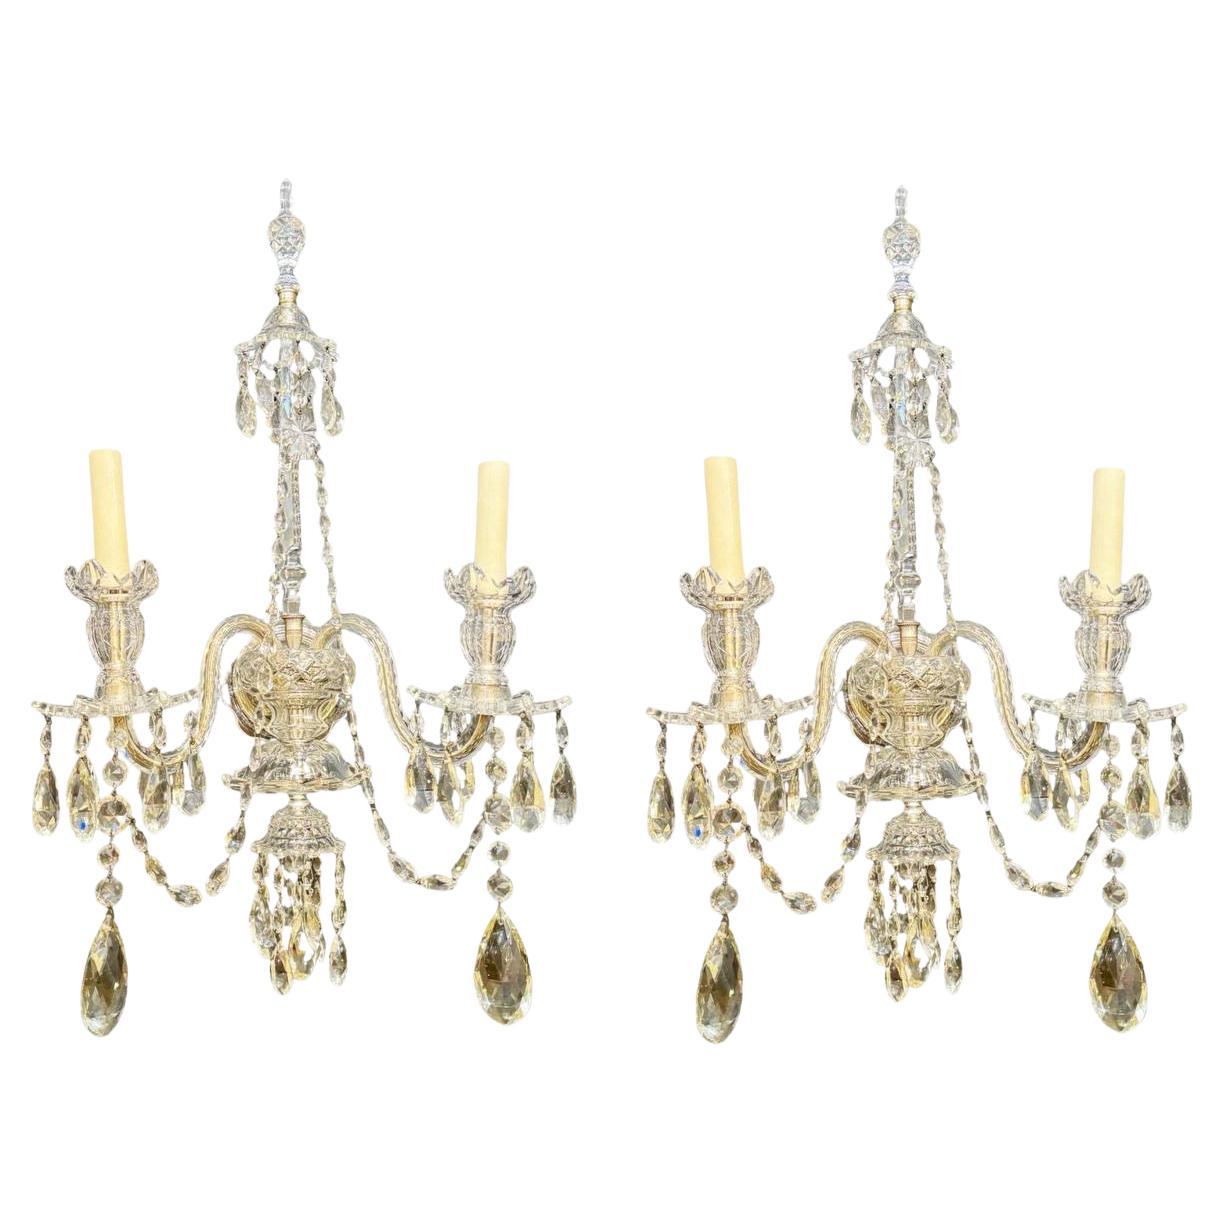 1900’s Baccarat 2 Lights Crystal Sconces - Pair 